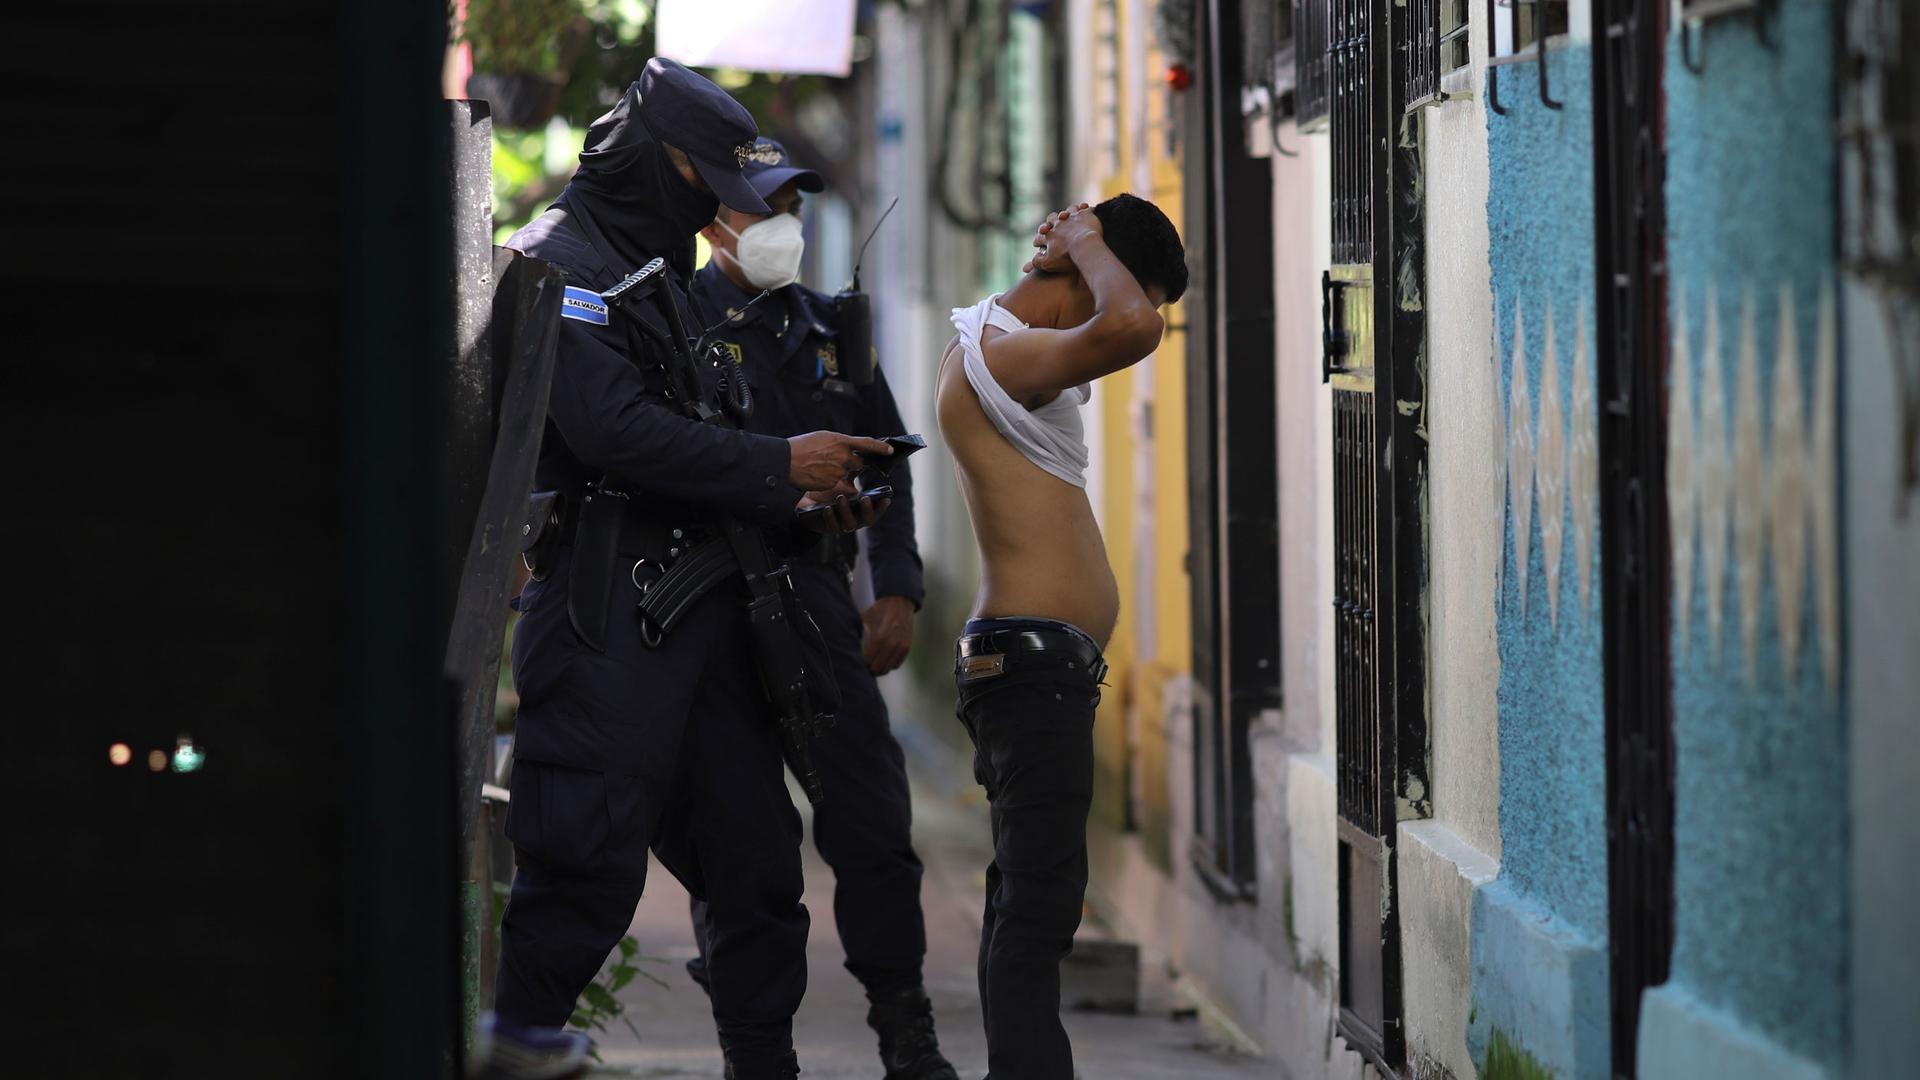 A police officer searches and checks the documents of a man living in the Kiwanis Community, during a preventive patrol in search of gang members in Soyapango, El Salvador, Aug. 16, 2022, amid a state of exception.